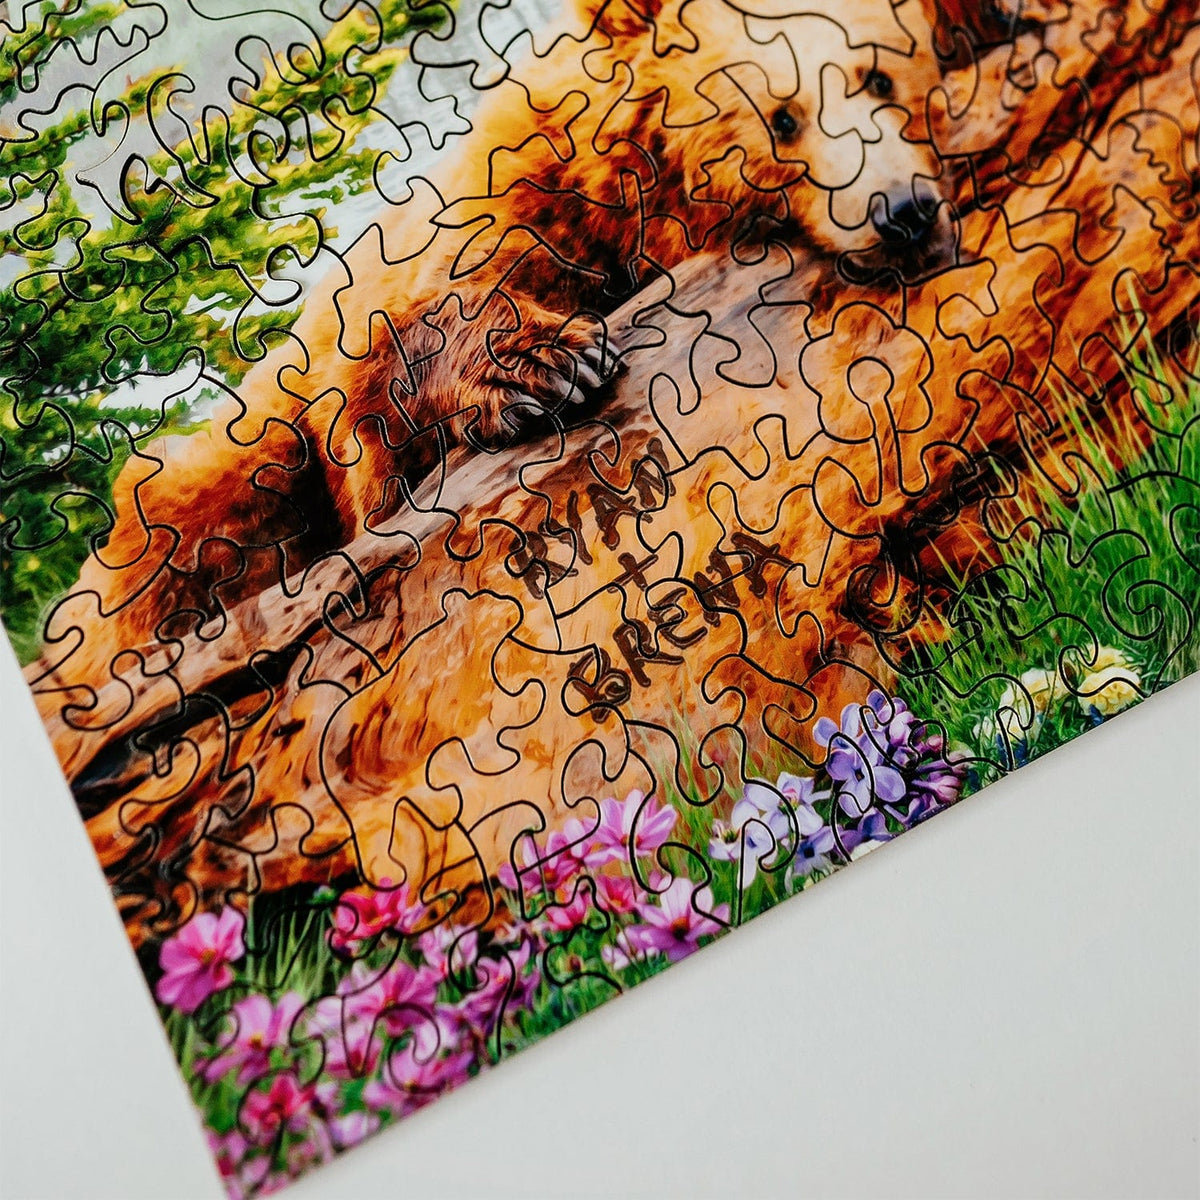 Personalized puzzle - detail of customization